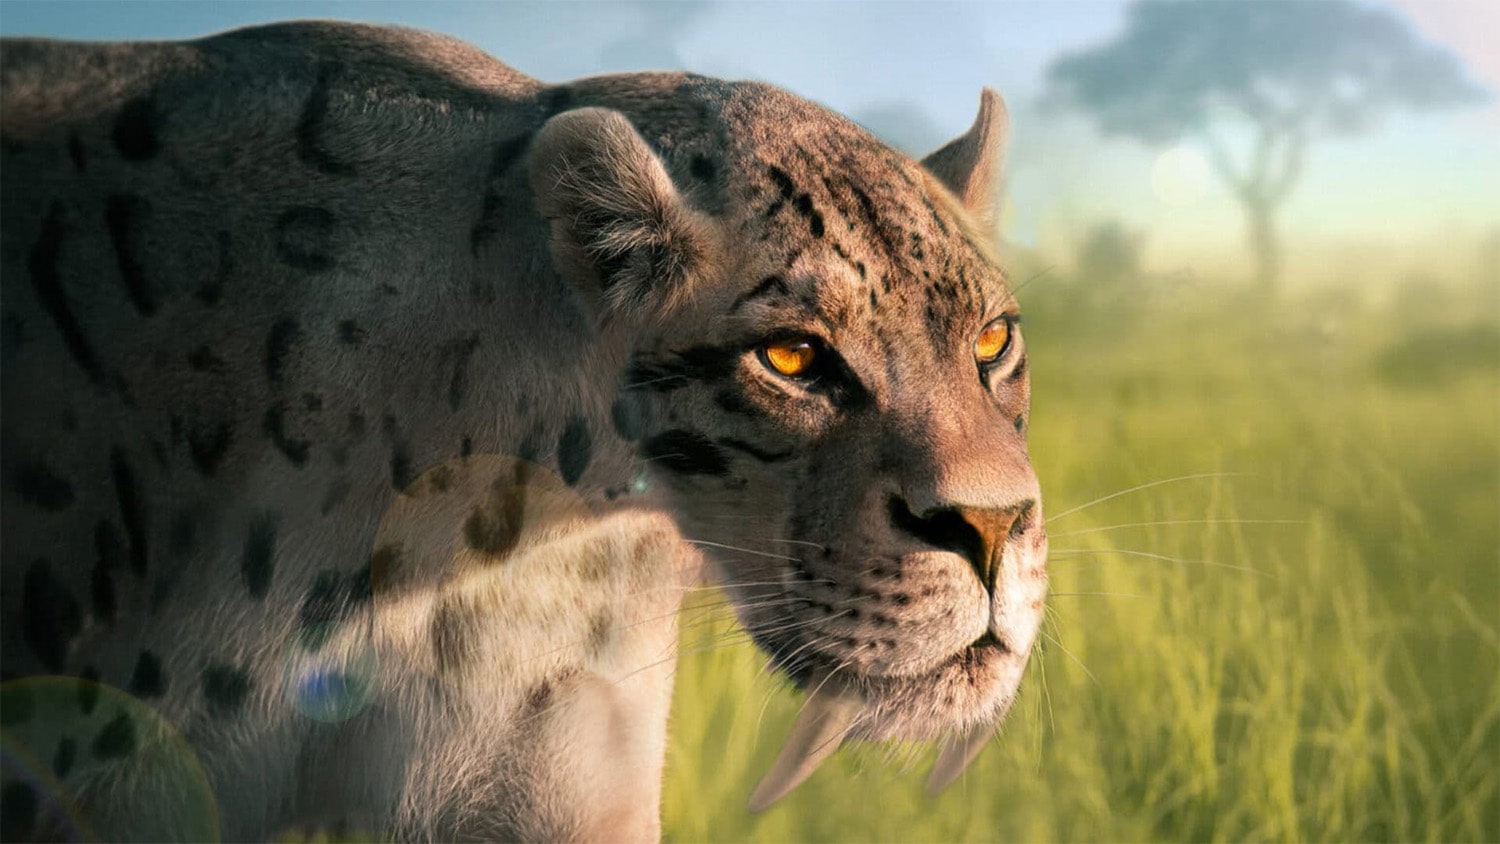 22 interesting facts about Smilodon